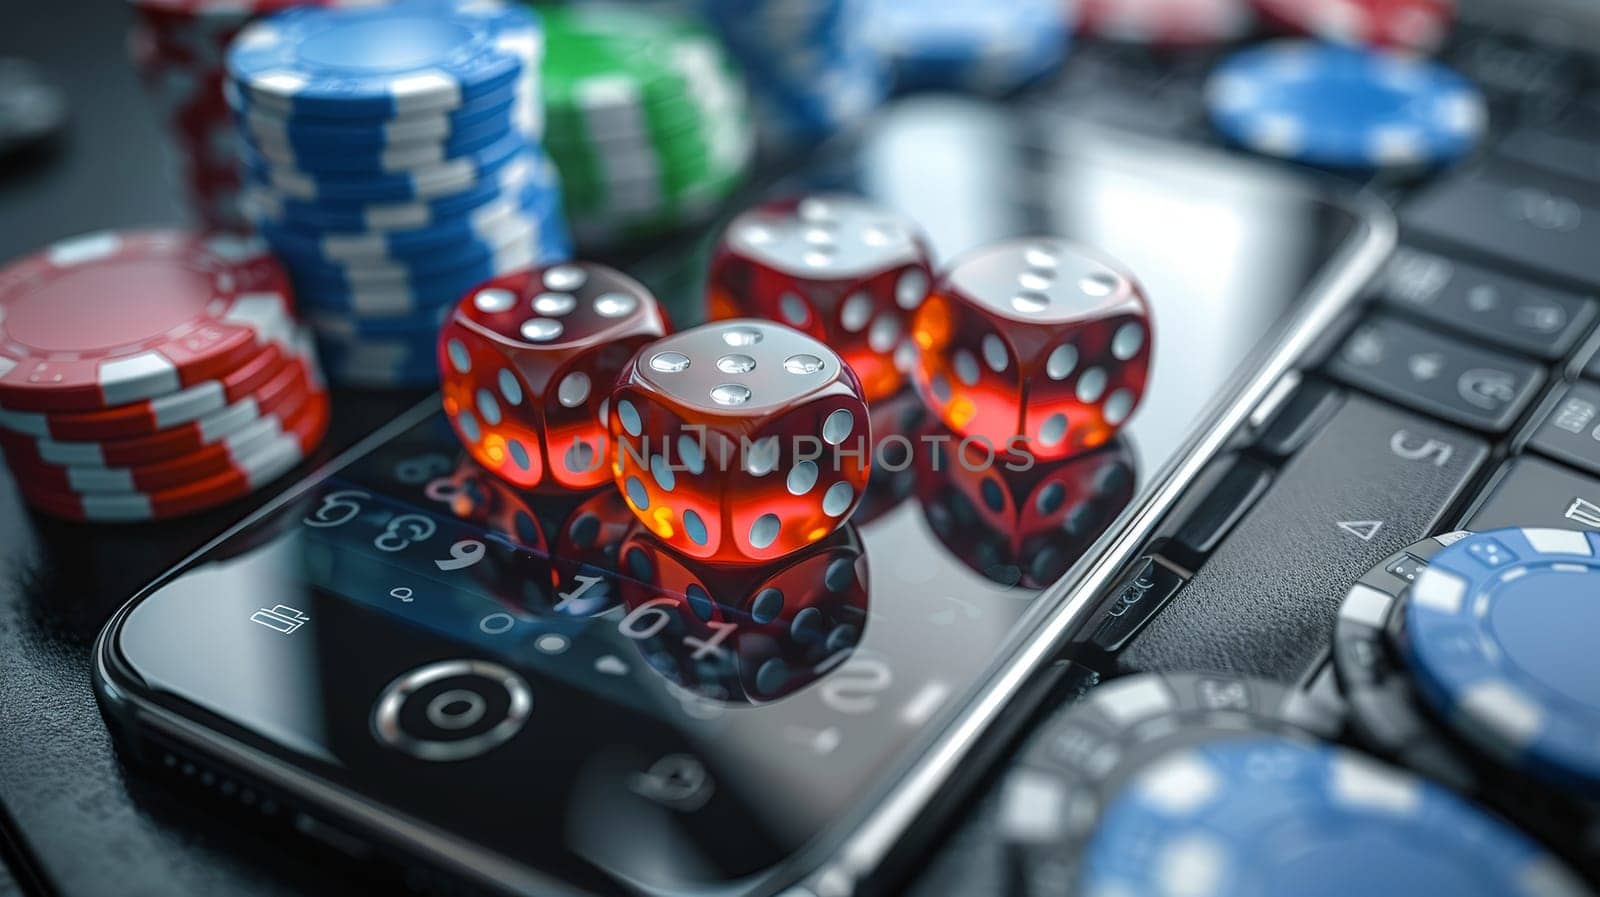 Virtual Baccarat Game on Smartphone with Sleek Professional Website Design.